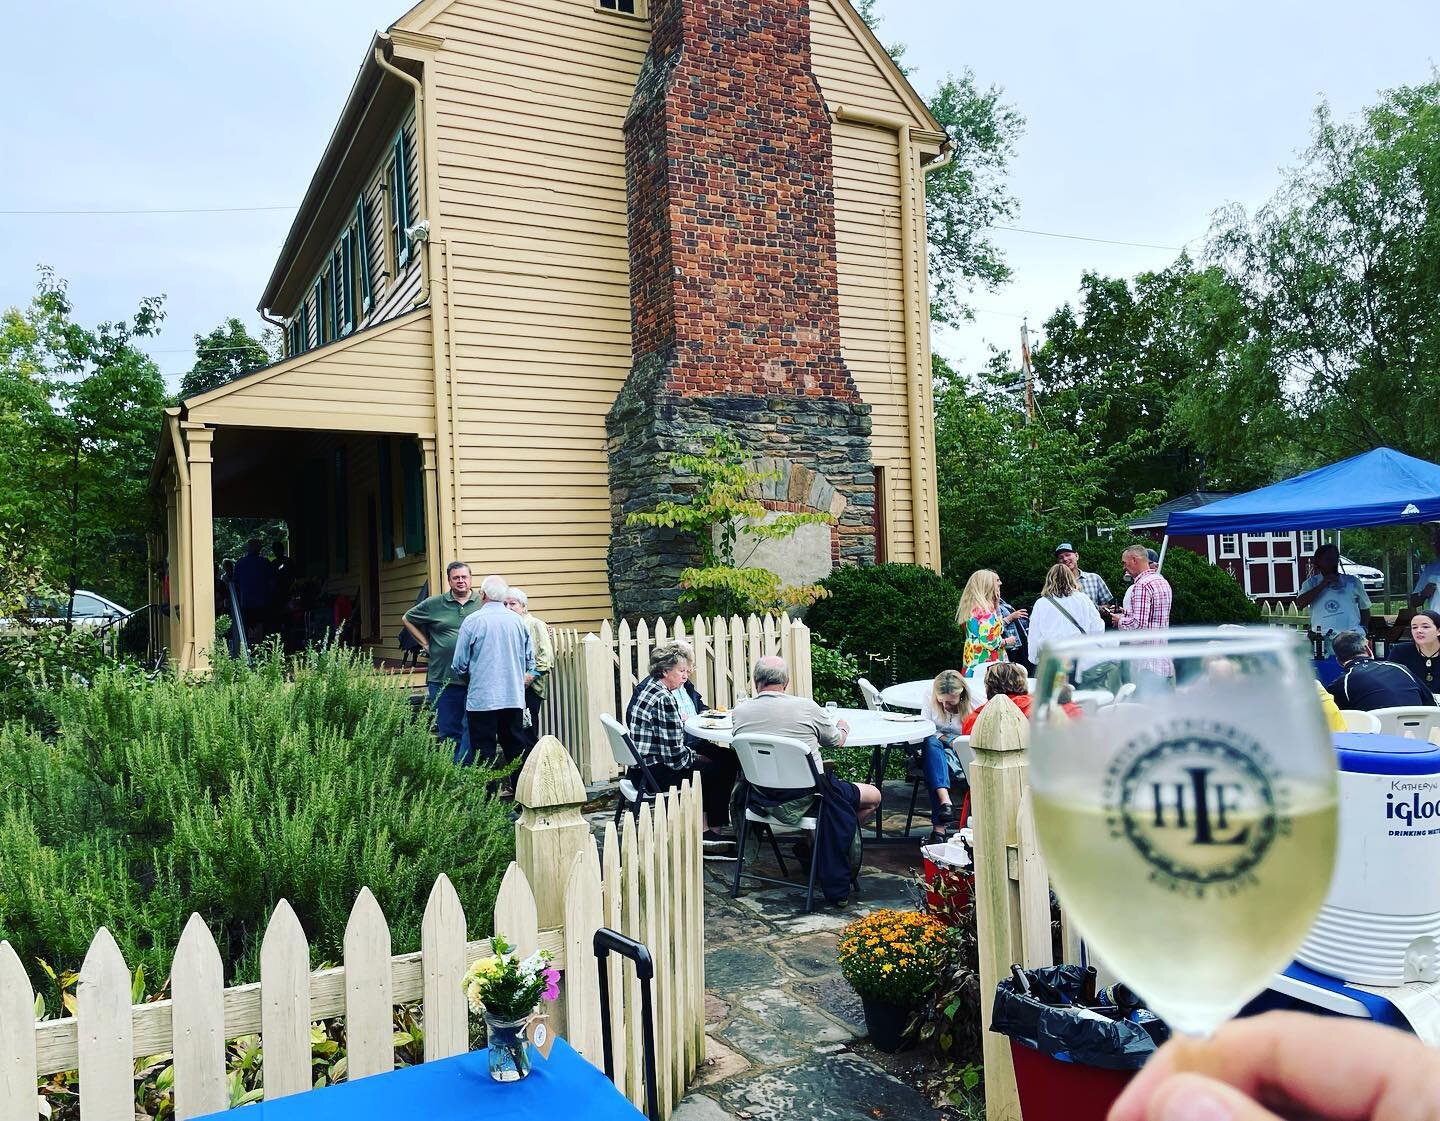 We were honored to be apart of the BBQ, banjos and beer event with @lynchburghistoricalfoundation please visit their website and follow them on social meeting for upcoming events. Preserving Lynchburg&rsquo;s Past. 

#lynchburgva 
#lynchburg 
#ourlyn